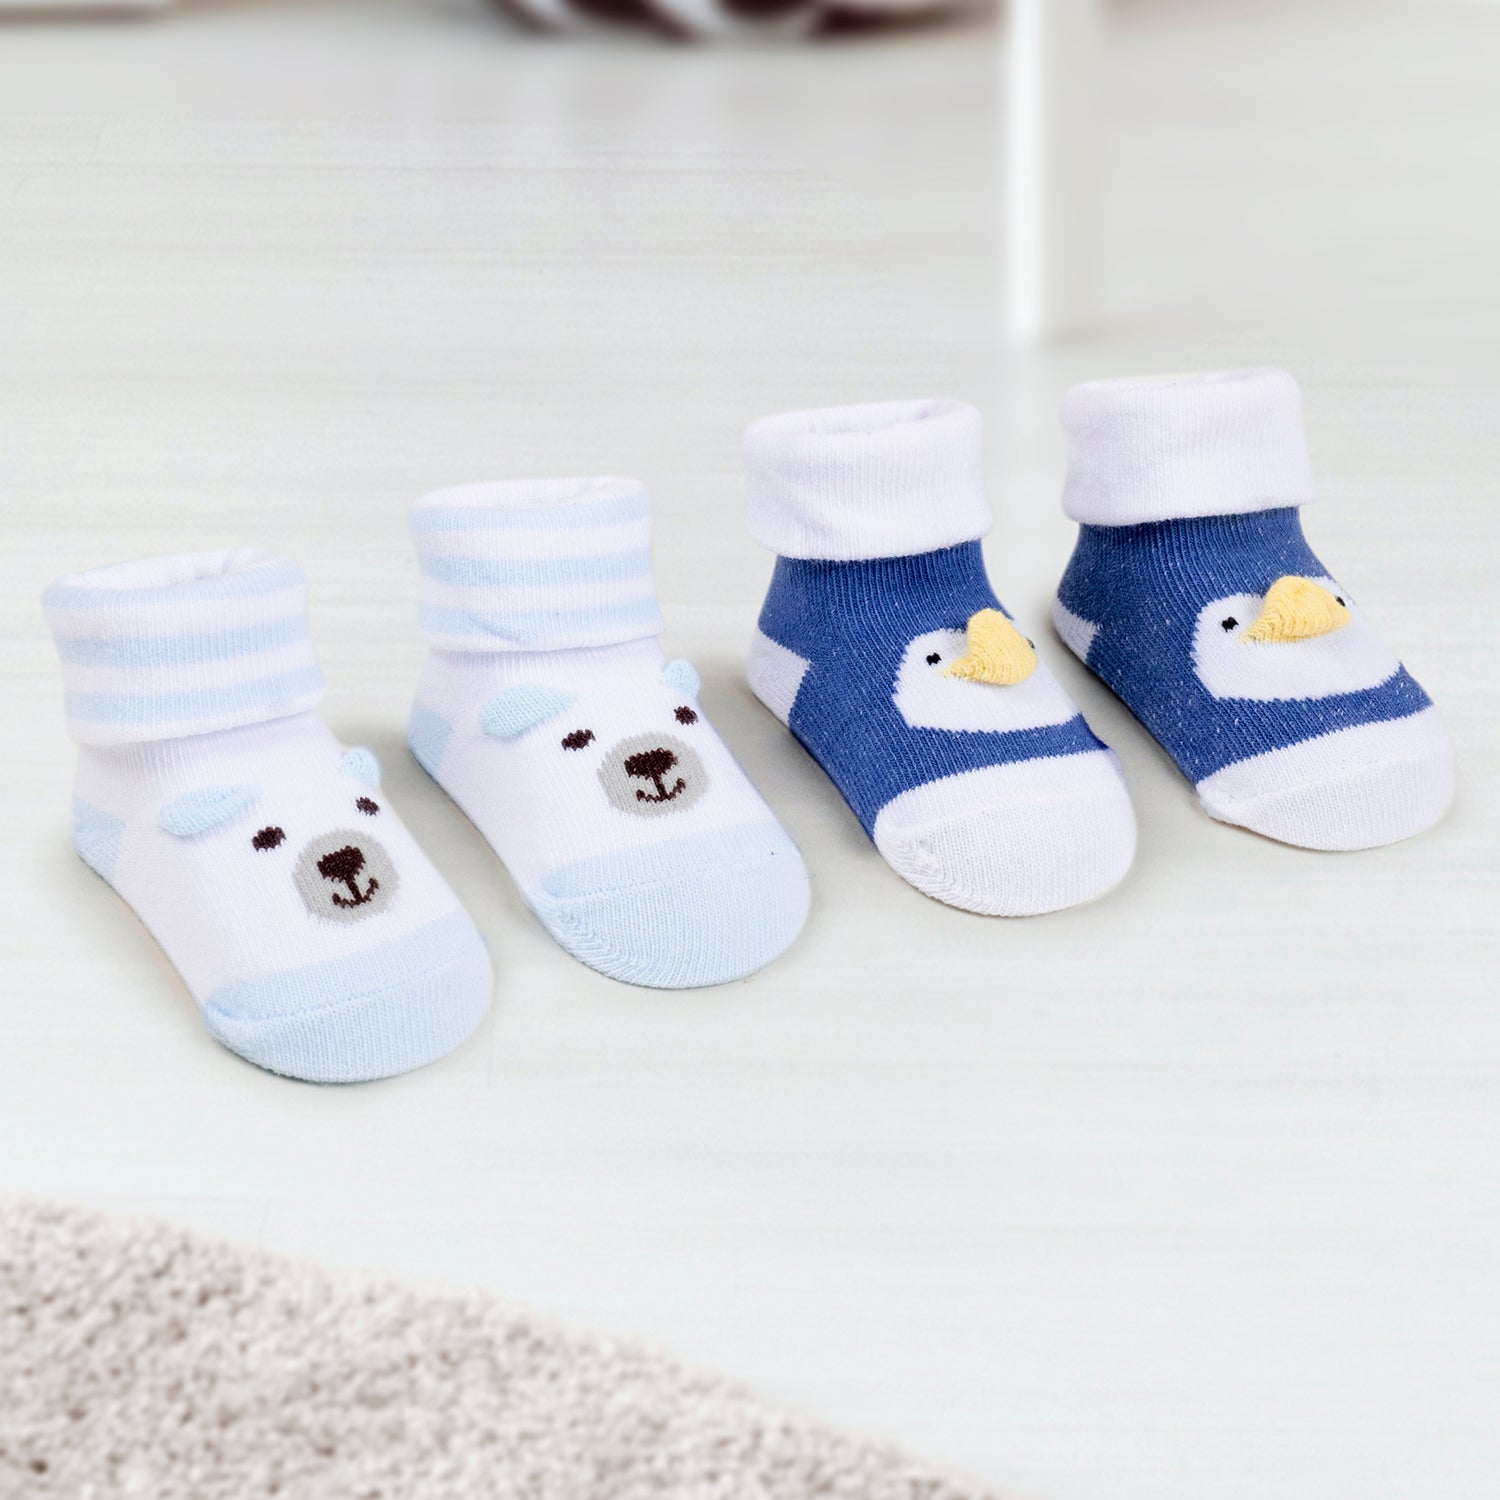 Baby Moo 3D Bear Duck Cotton Ankle Length Infant Dress Up Walking Set of 2 Socks Booties - Blue